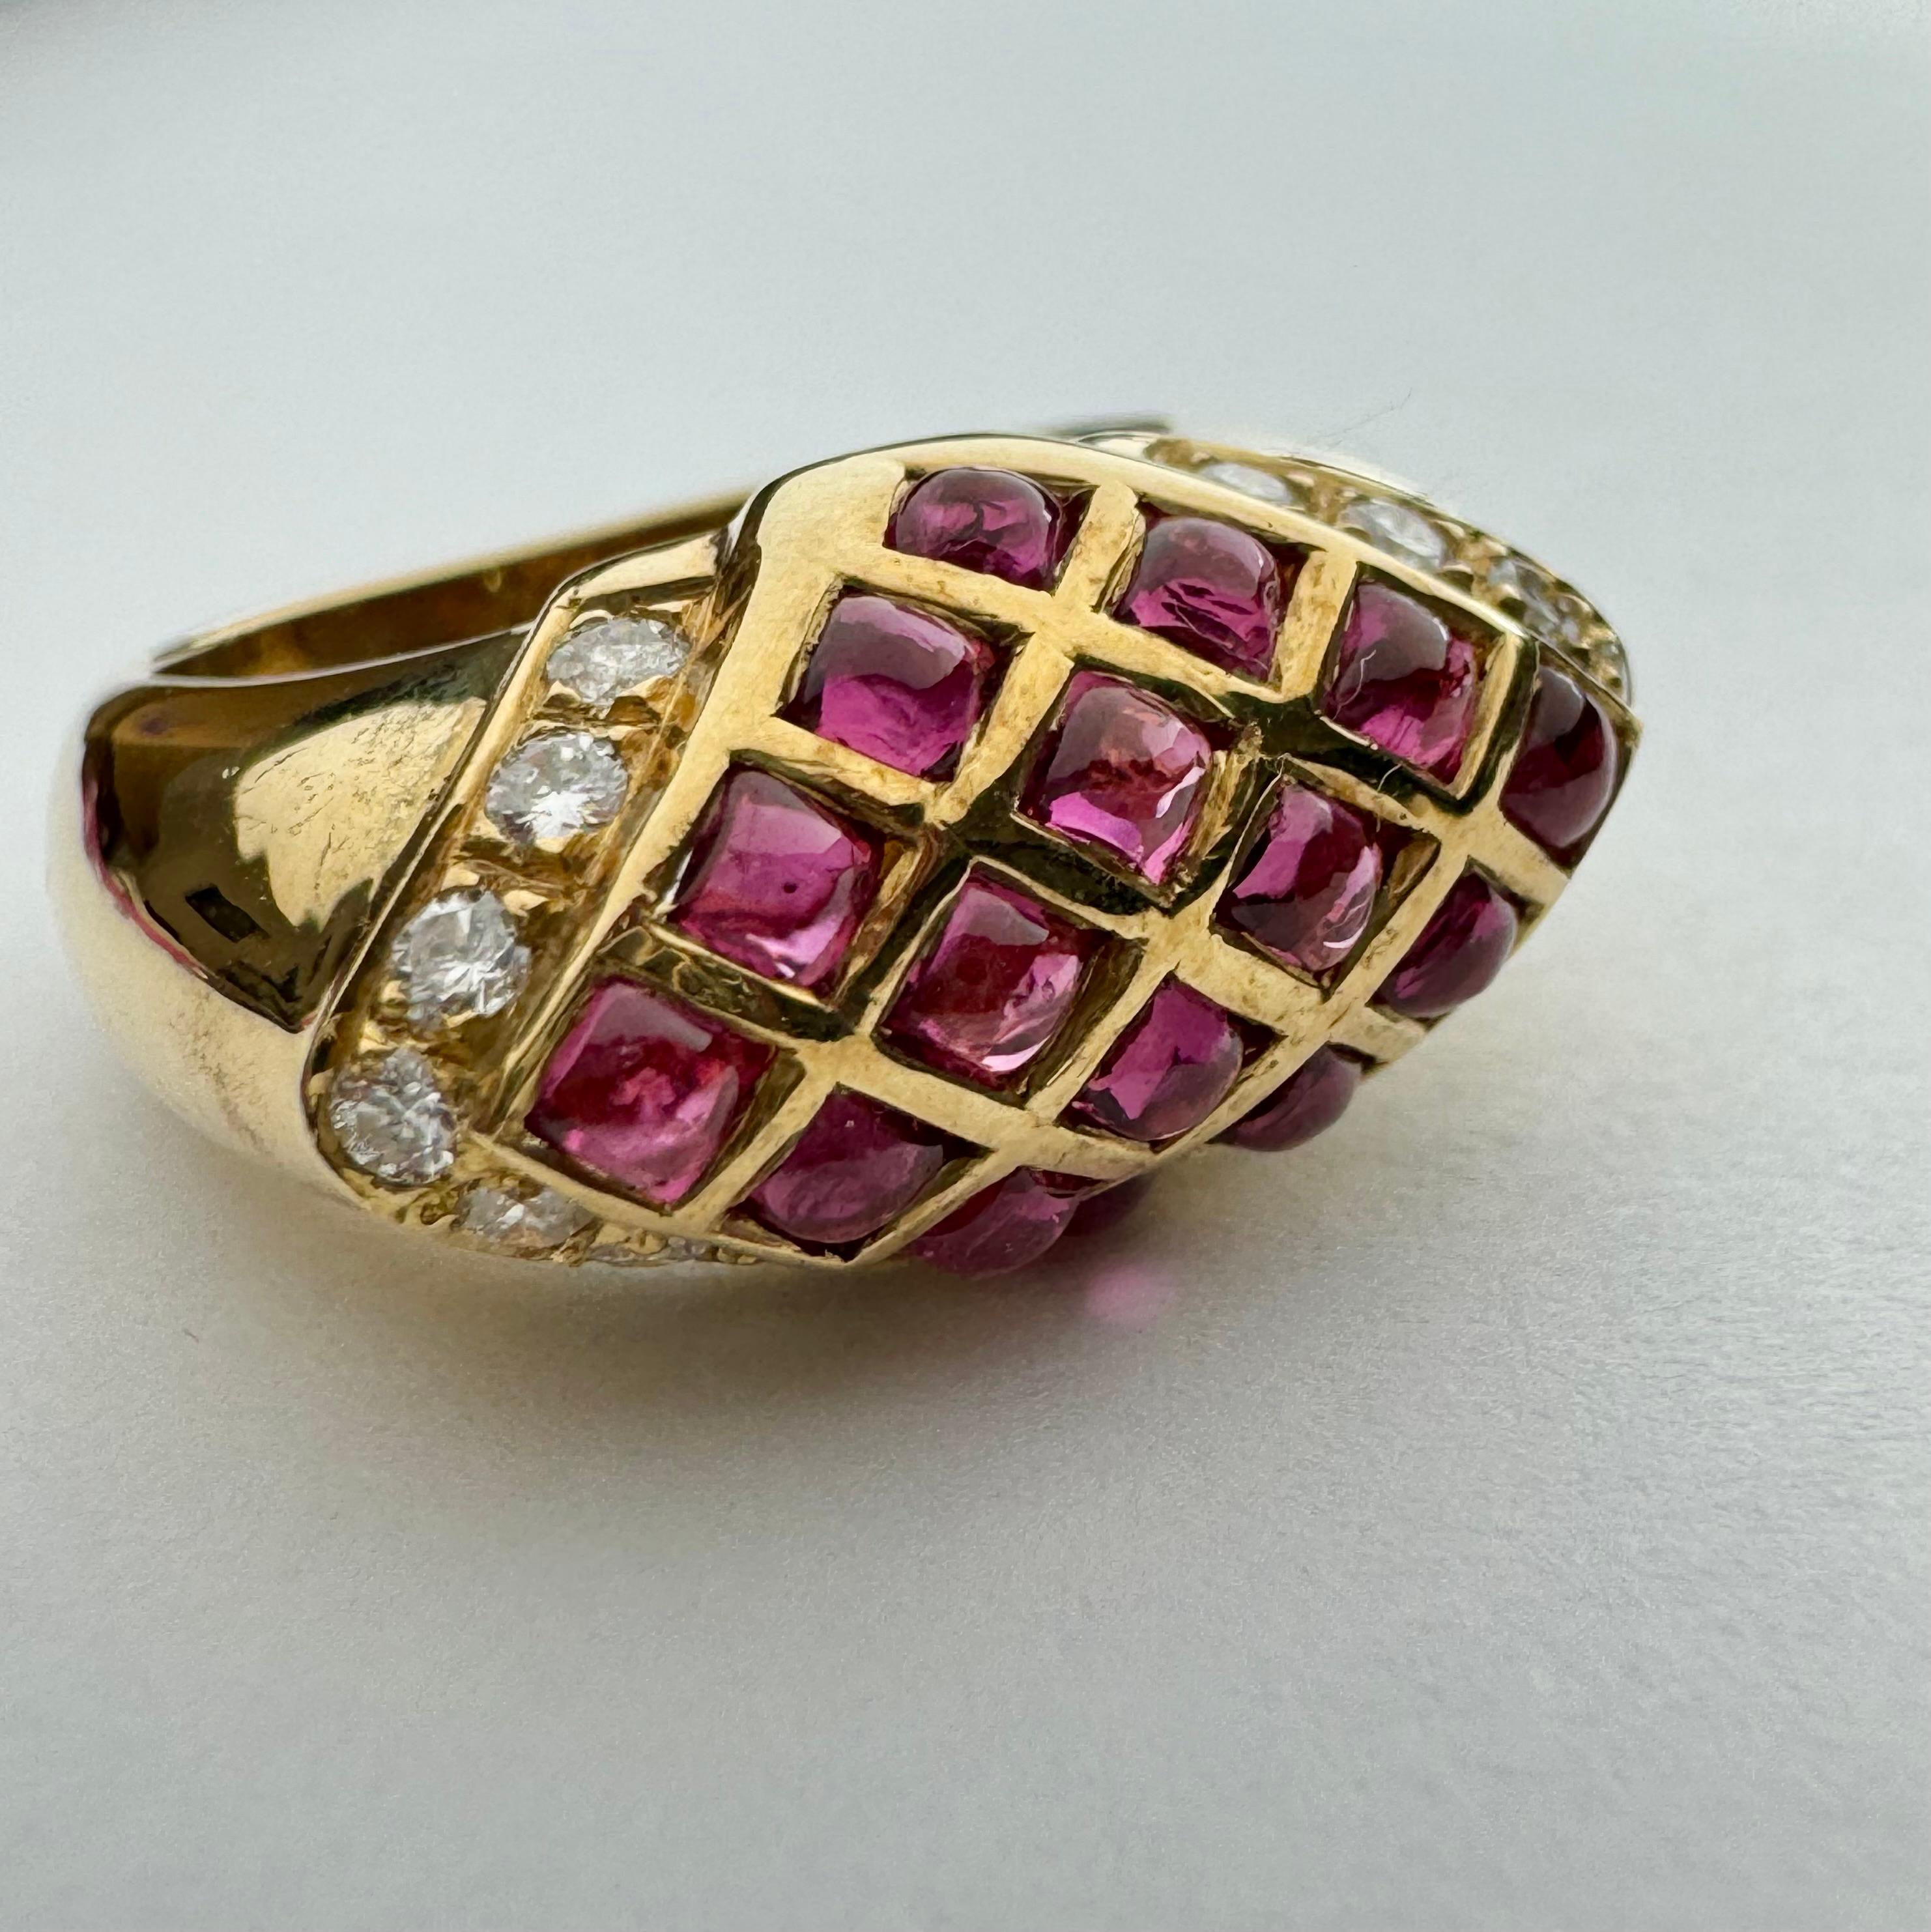 Rare and unique ruby and diamond domed ring, in 14k yellow gold.  The top portion of the ring is cloaked with 16 gorgeous matching cabochon rubies, forming an elegant quilted design.  There are 14 round brilliant diamonds adorning the ends of the